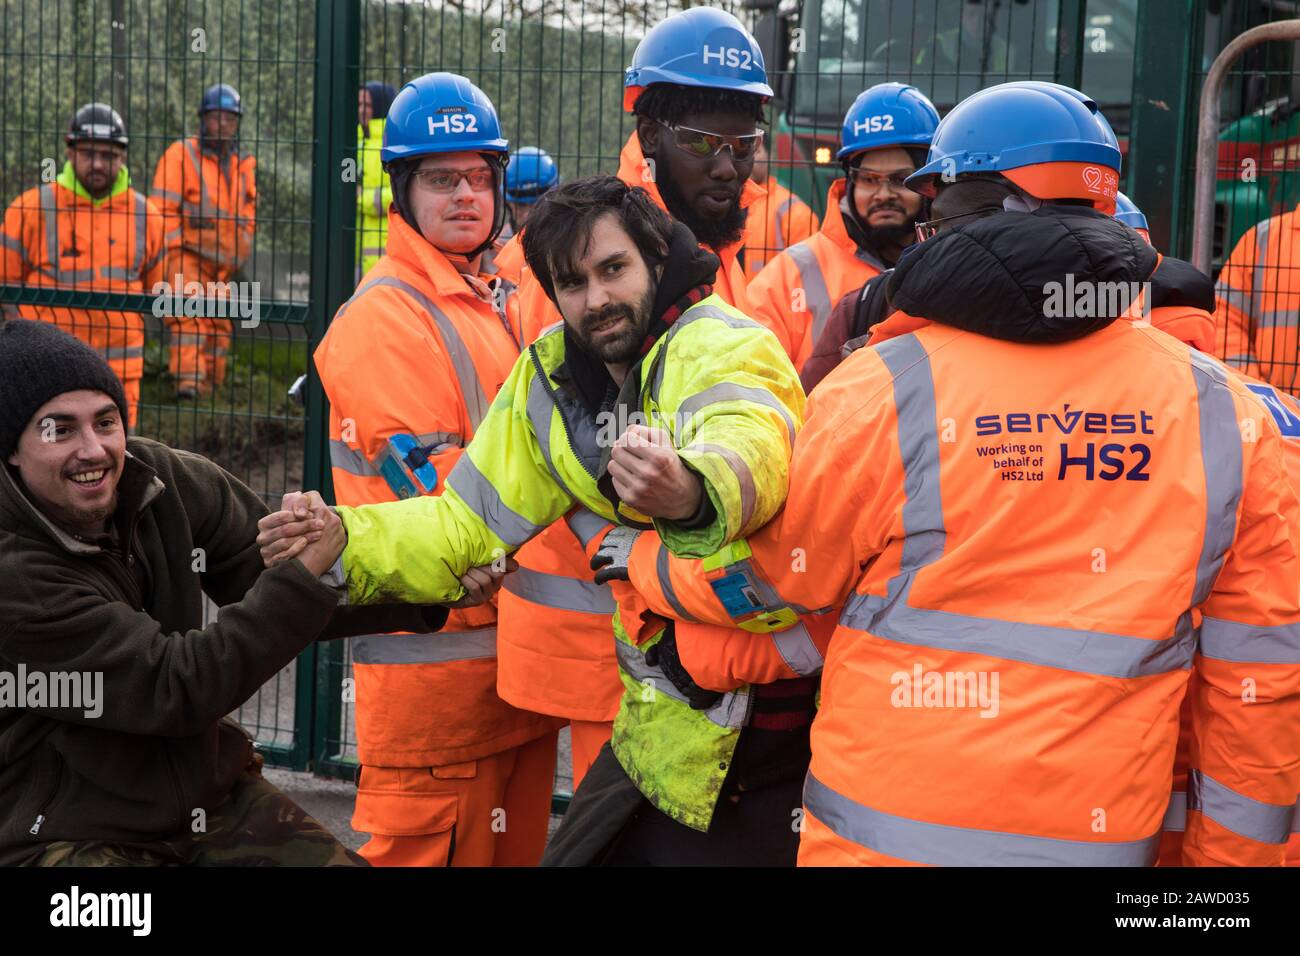 Harefield, UK. 8 February, 2020. HS2 engineers and security guards try to prevent environmental activists from Save the Colne Valley, Stop HS2 and Extinction Rebellion from accessing an area of Harvil Road fenced off in order to carry out tree felling works for the high-speed rail project. The activists were successful in preventing any of the scheduled tree felling by HS2 and after an intervention by a police officer all tree felling work has now been cancelled for the weekend. Credit: Mark Kerrison/Alamy Live News Stock Photo